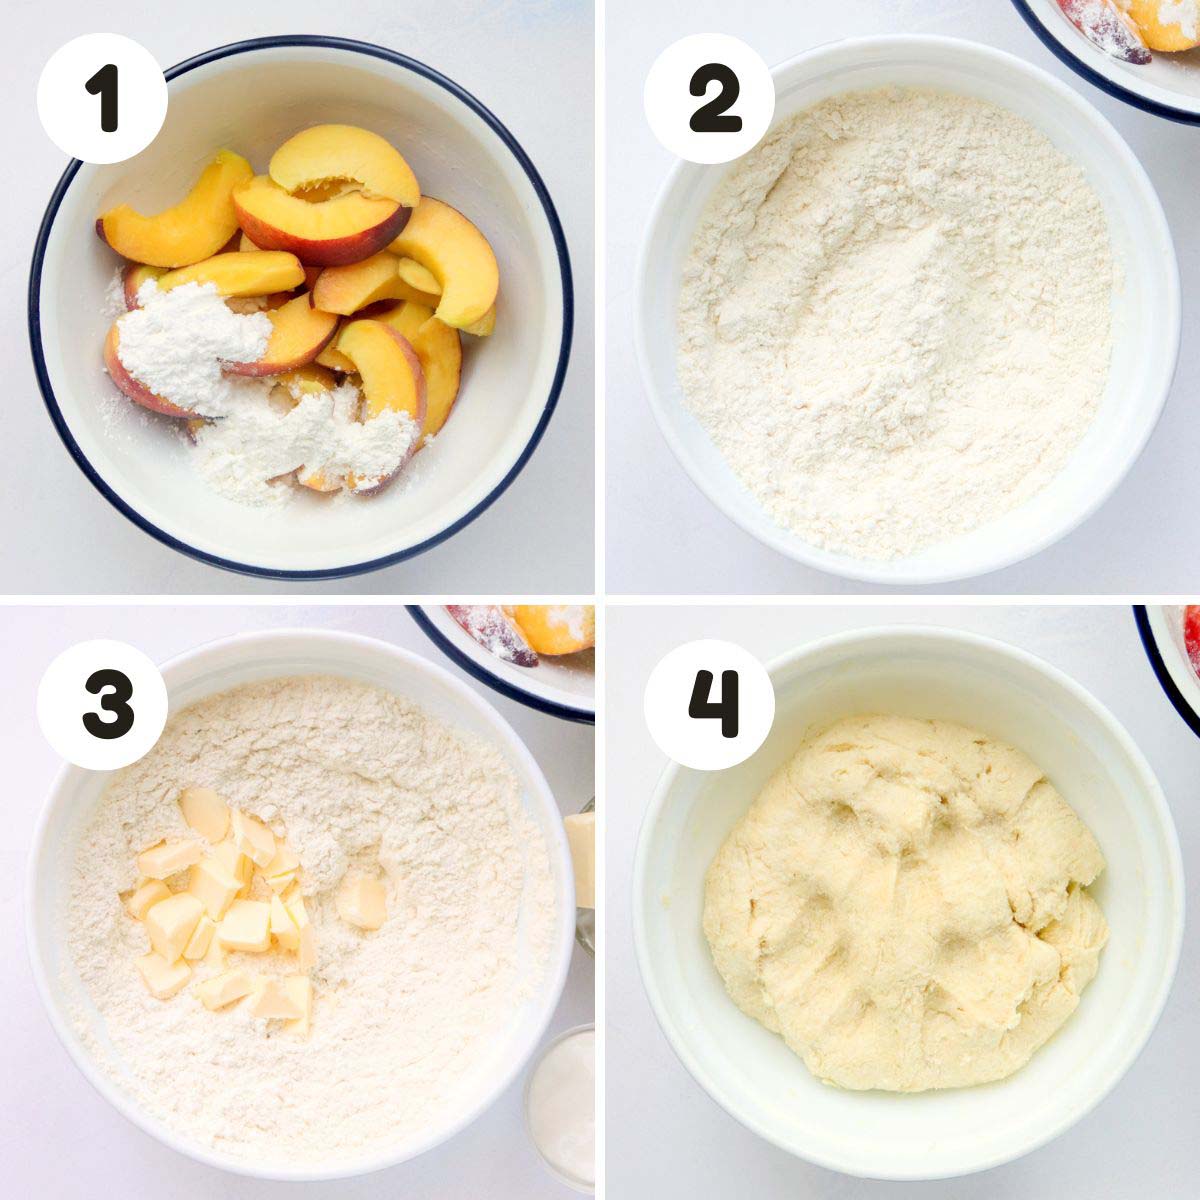 Steps to make the galette.